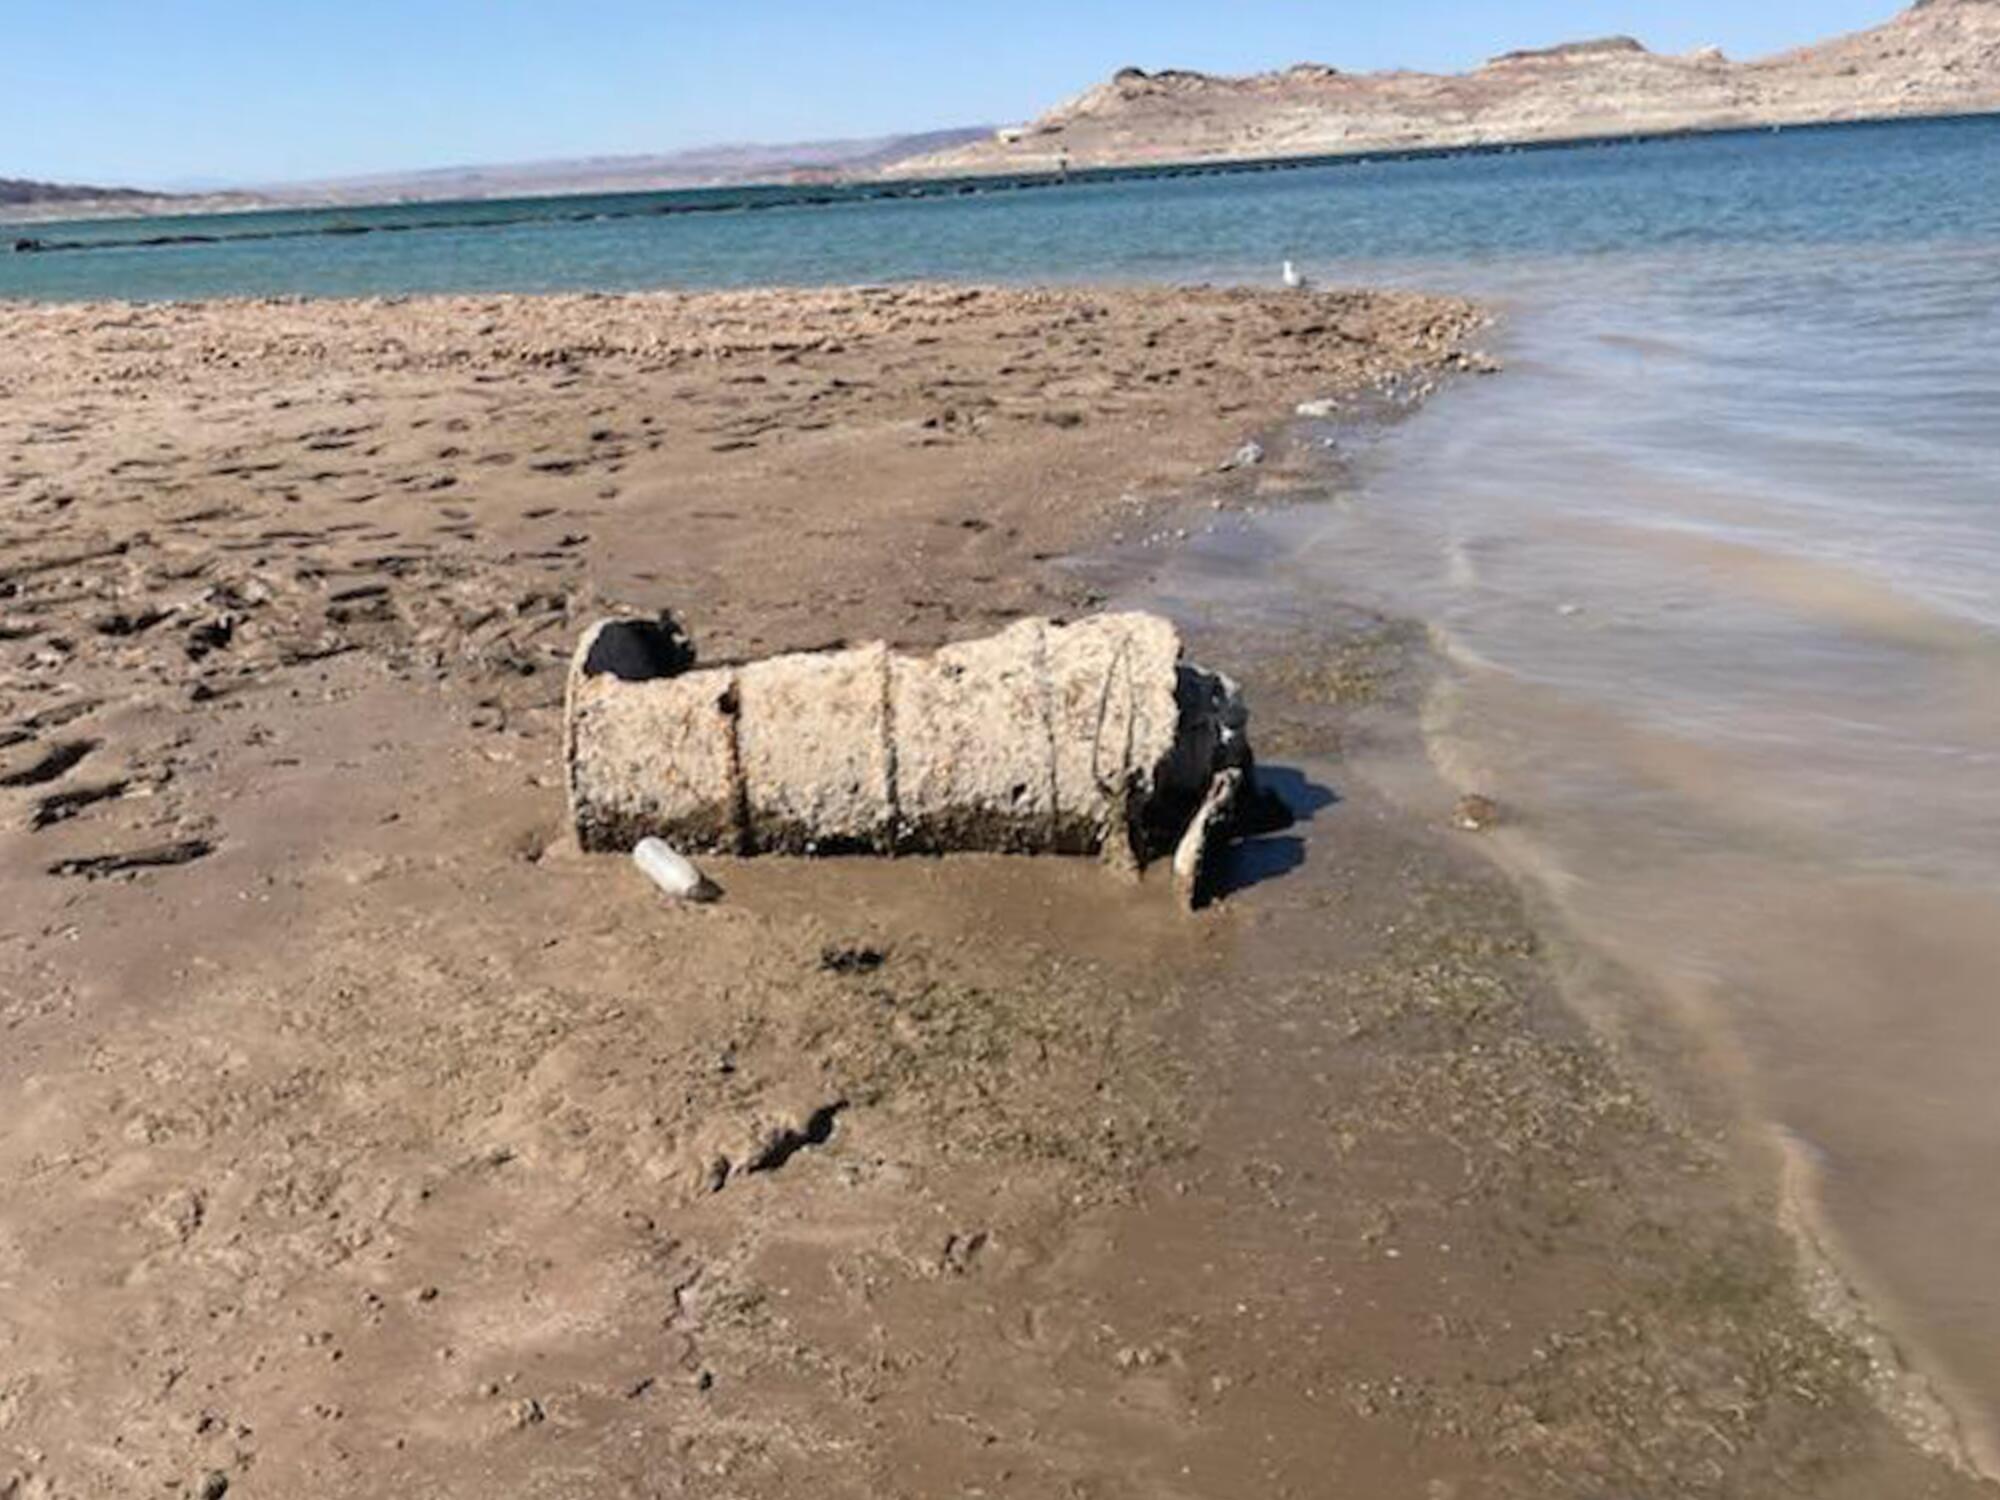 Human remains were found inside a barrel that used to be submerged in Lake Mead when water levels were higher.